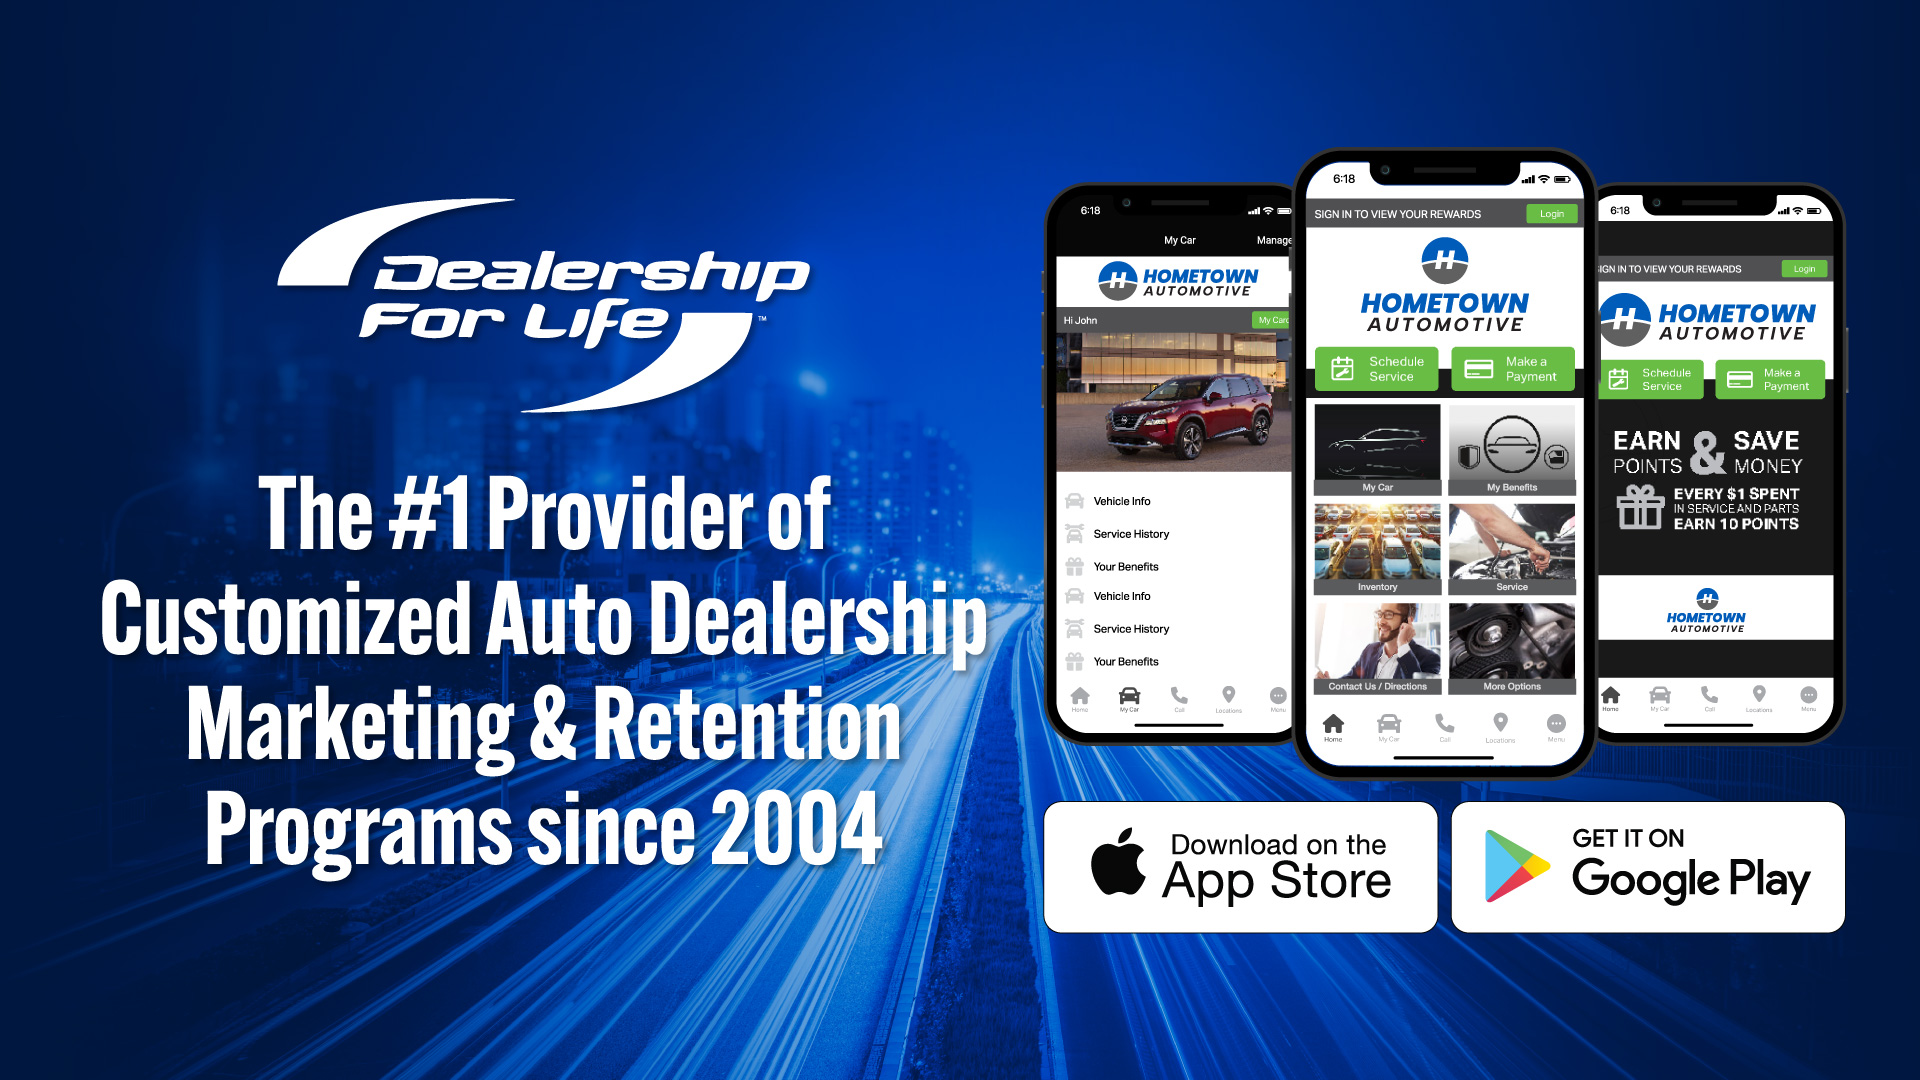 Retention Dealership For Life since 2004